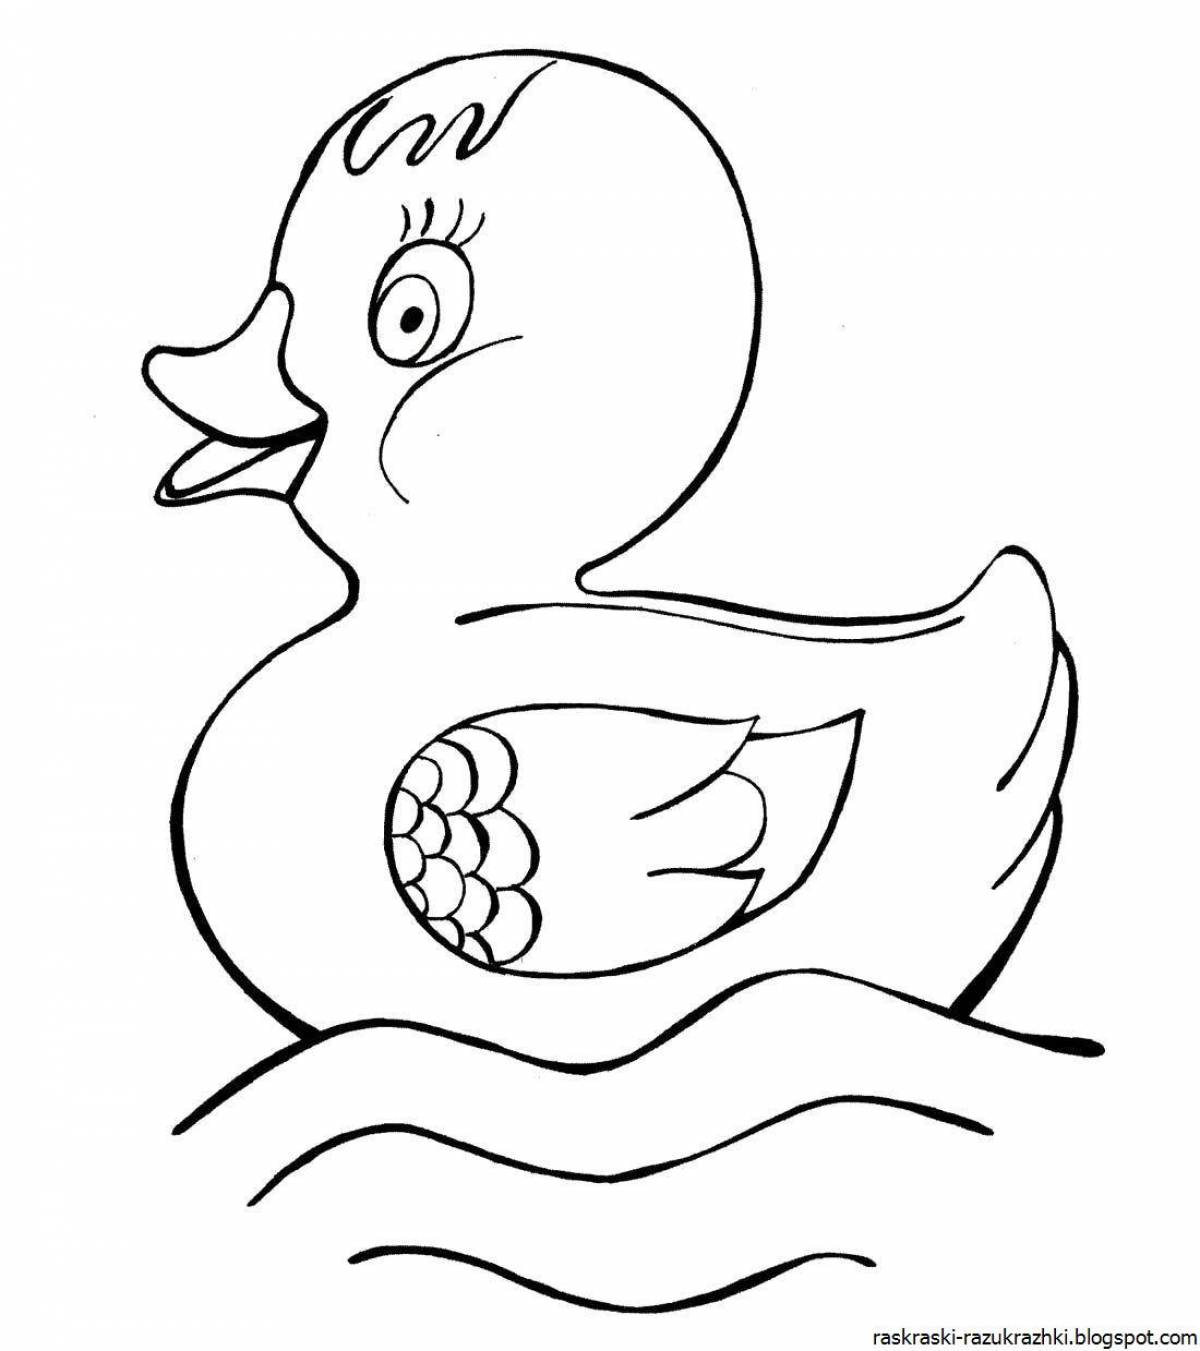 Playful duck coloring book